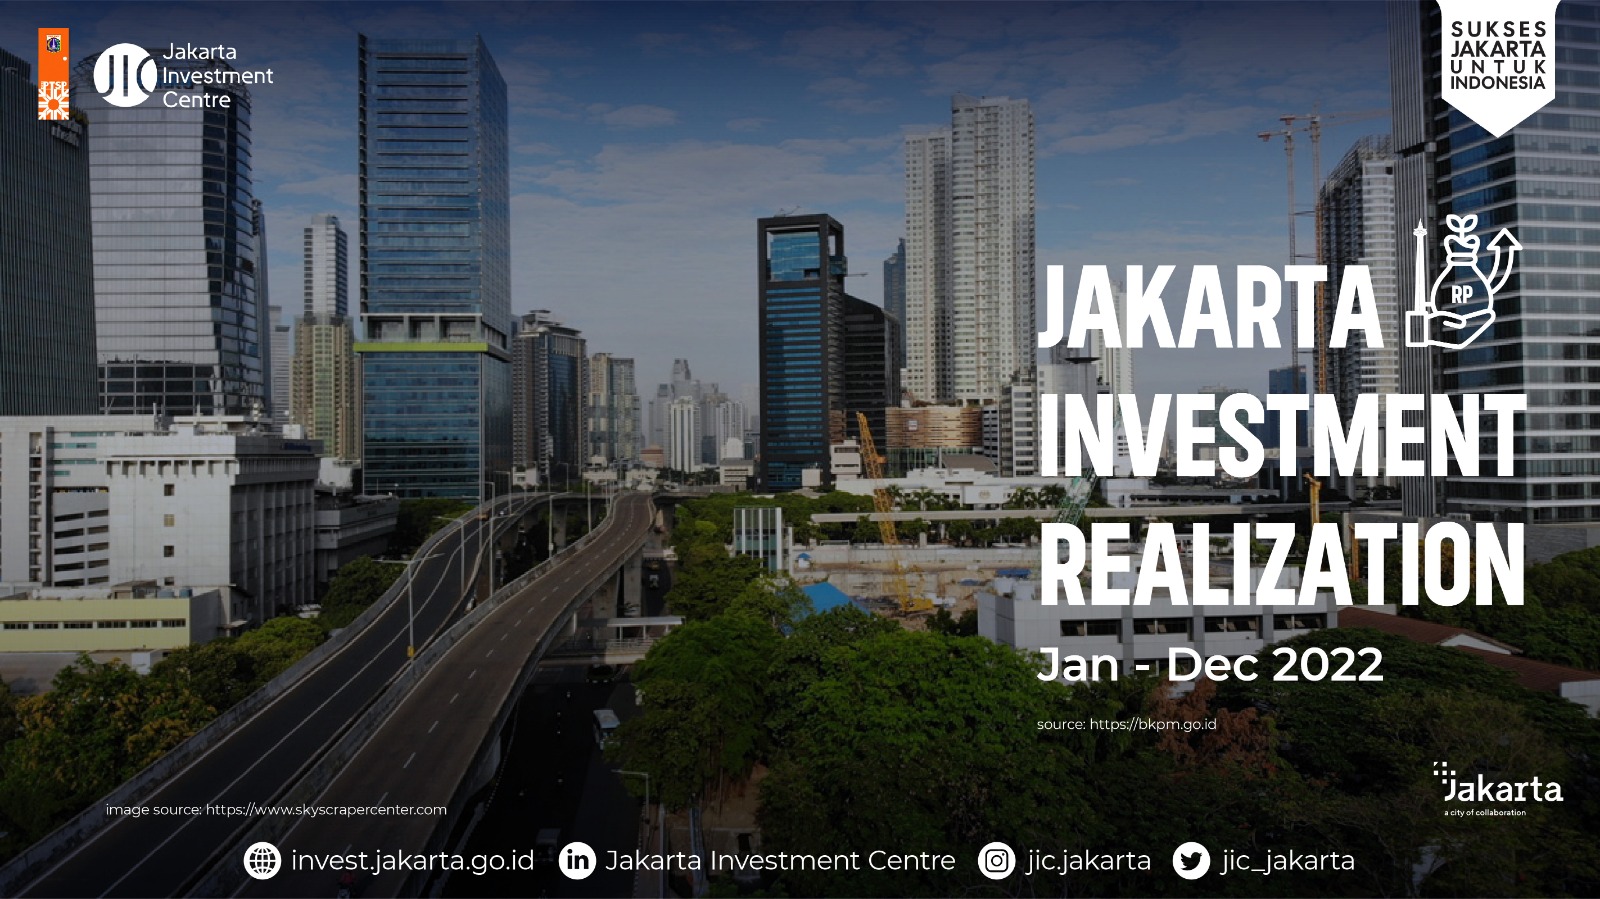 Investment Realization in Jakarta: A Comprehensive Report for 2022